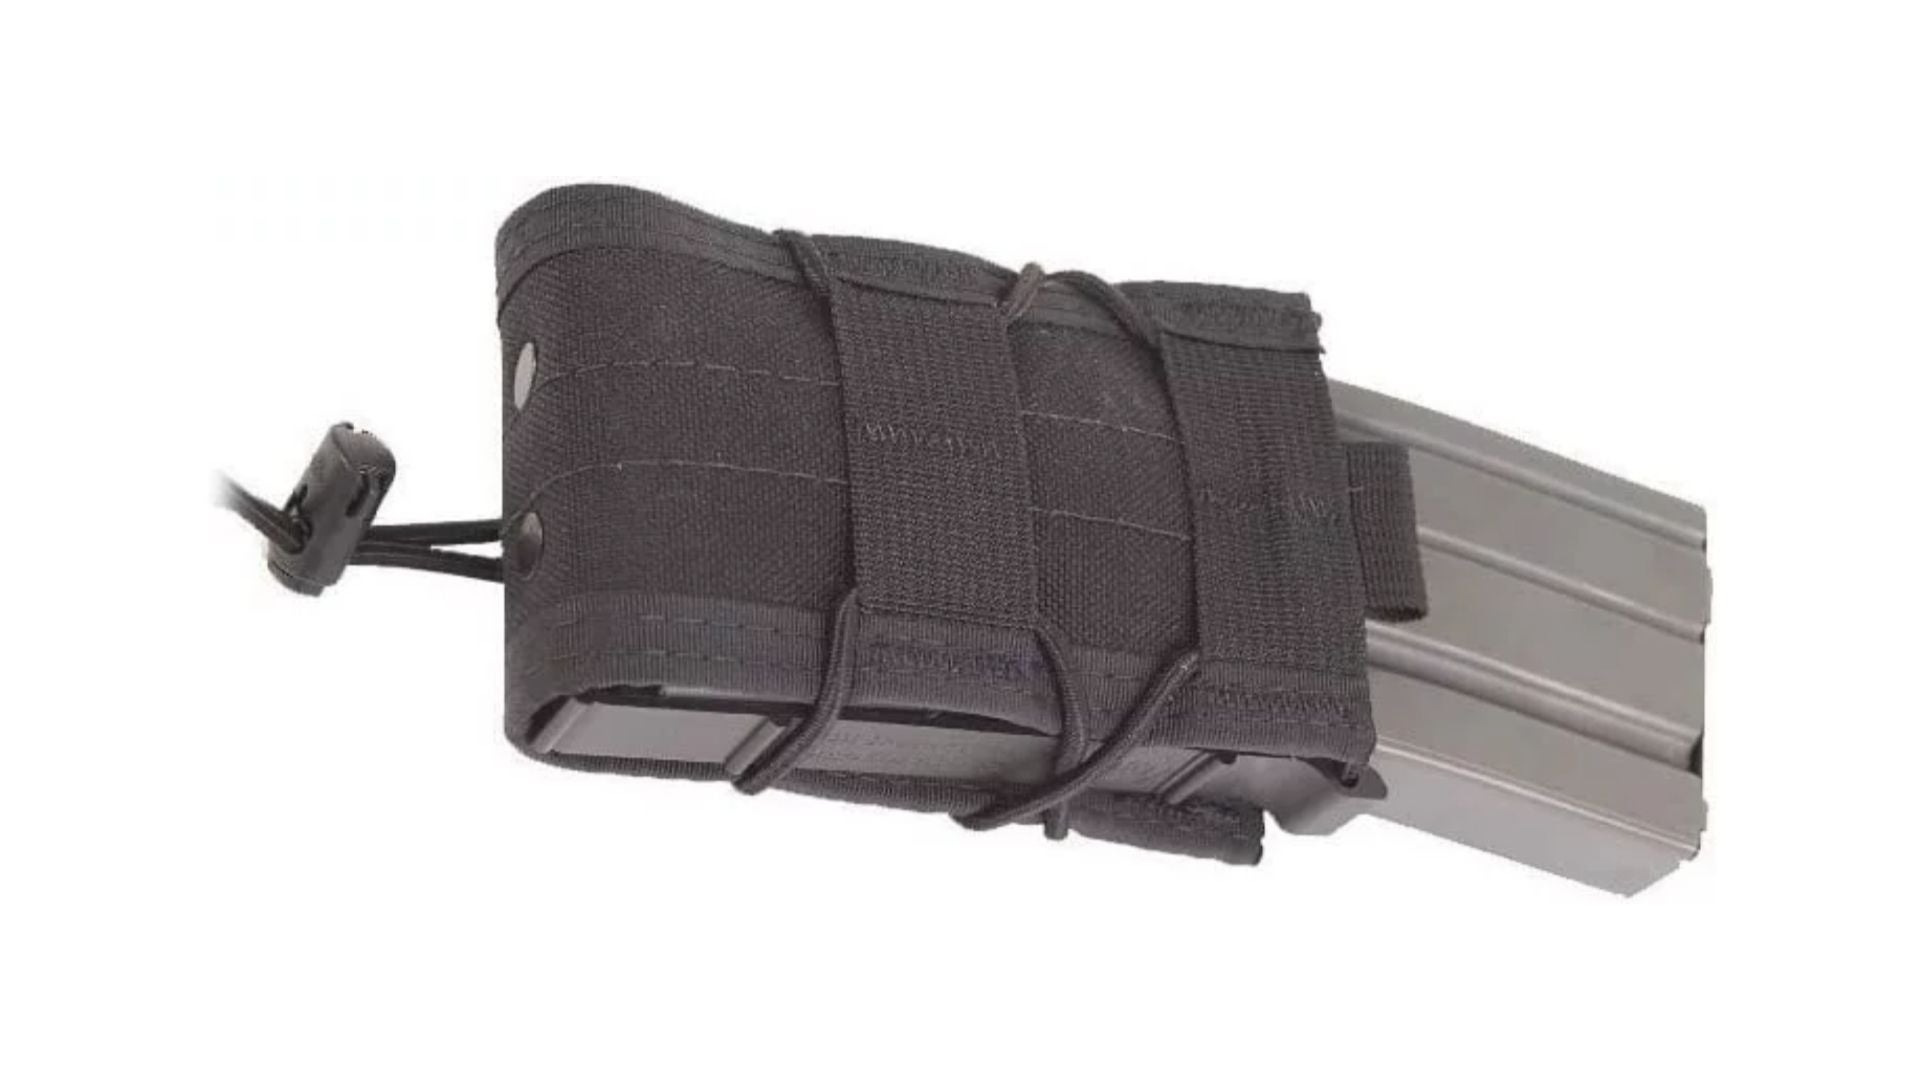 Kydex Kangaroo PCC SMG Magazine Pouch Insert for Tactical Vest Plate Carrier 